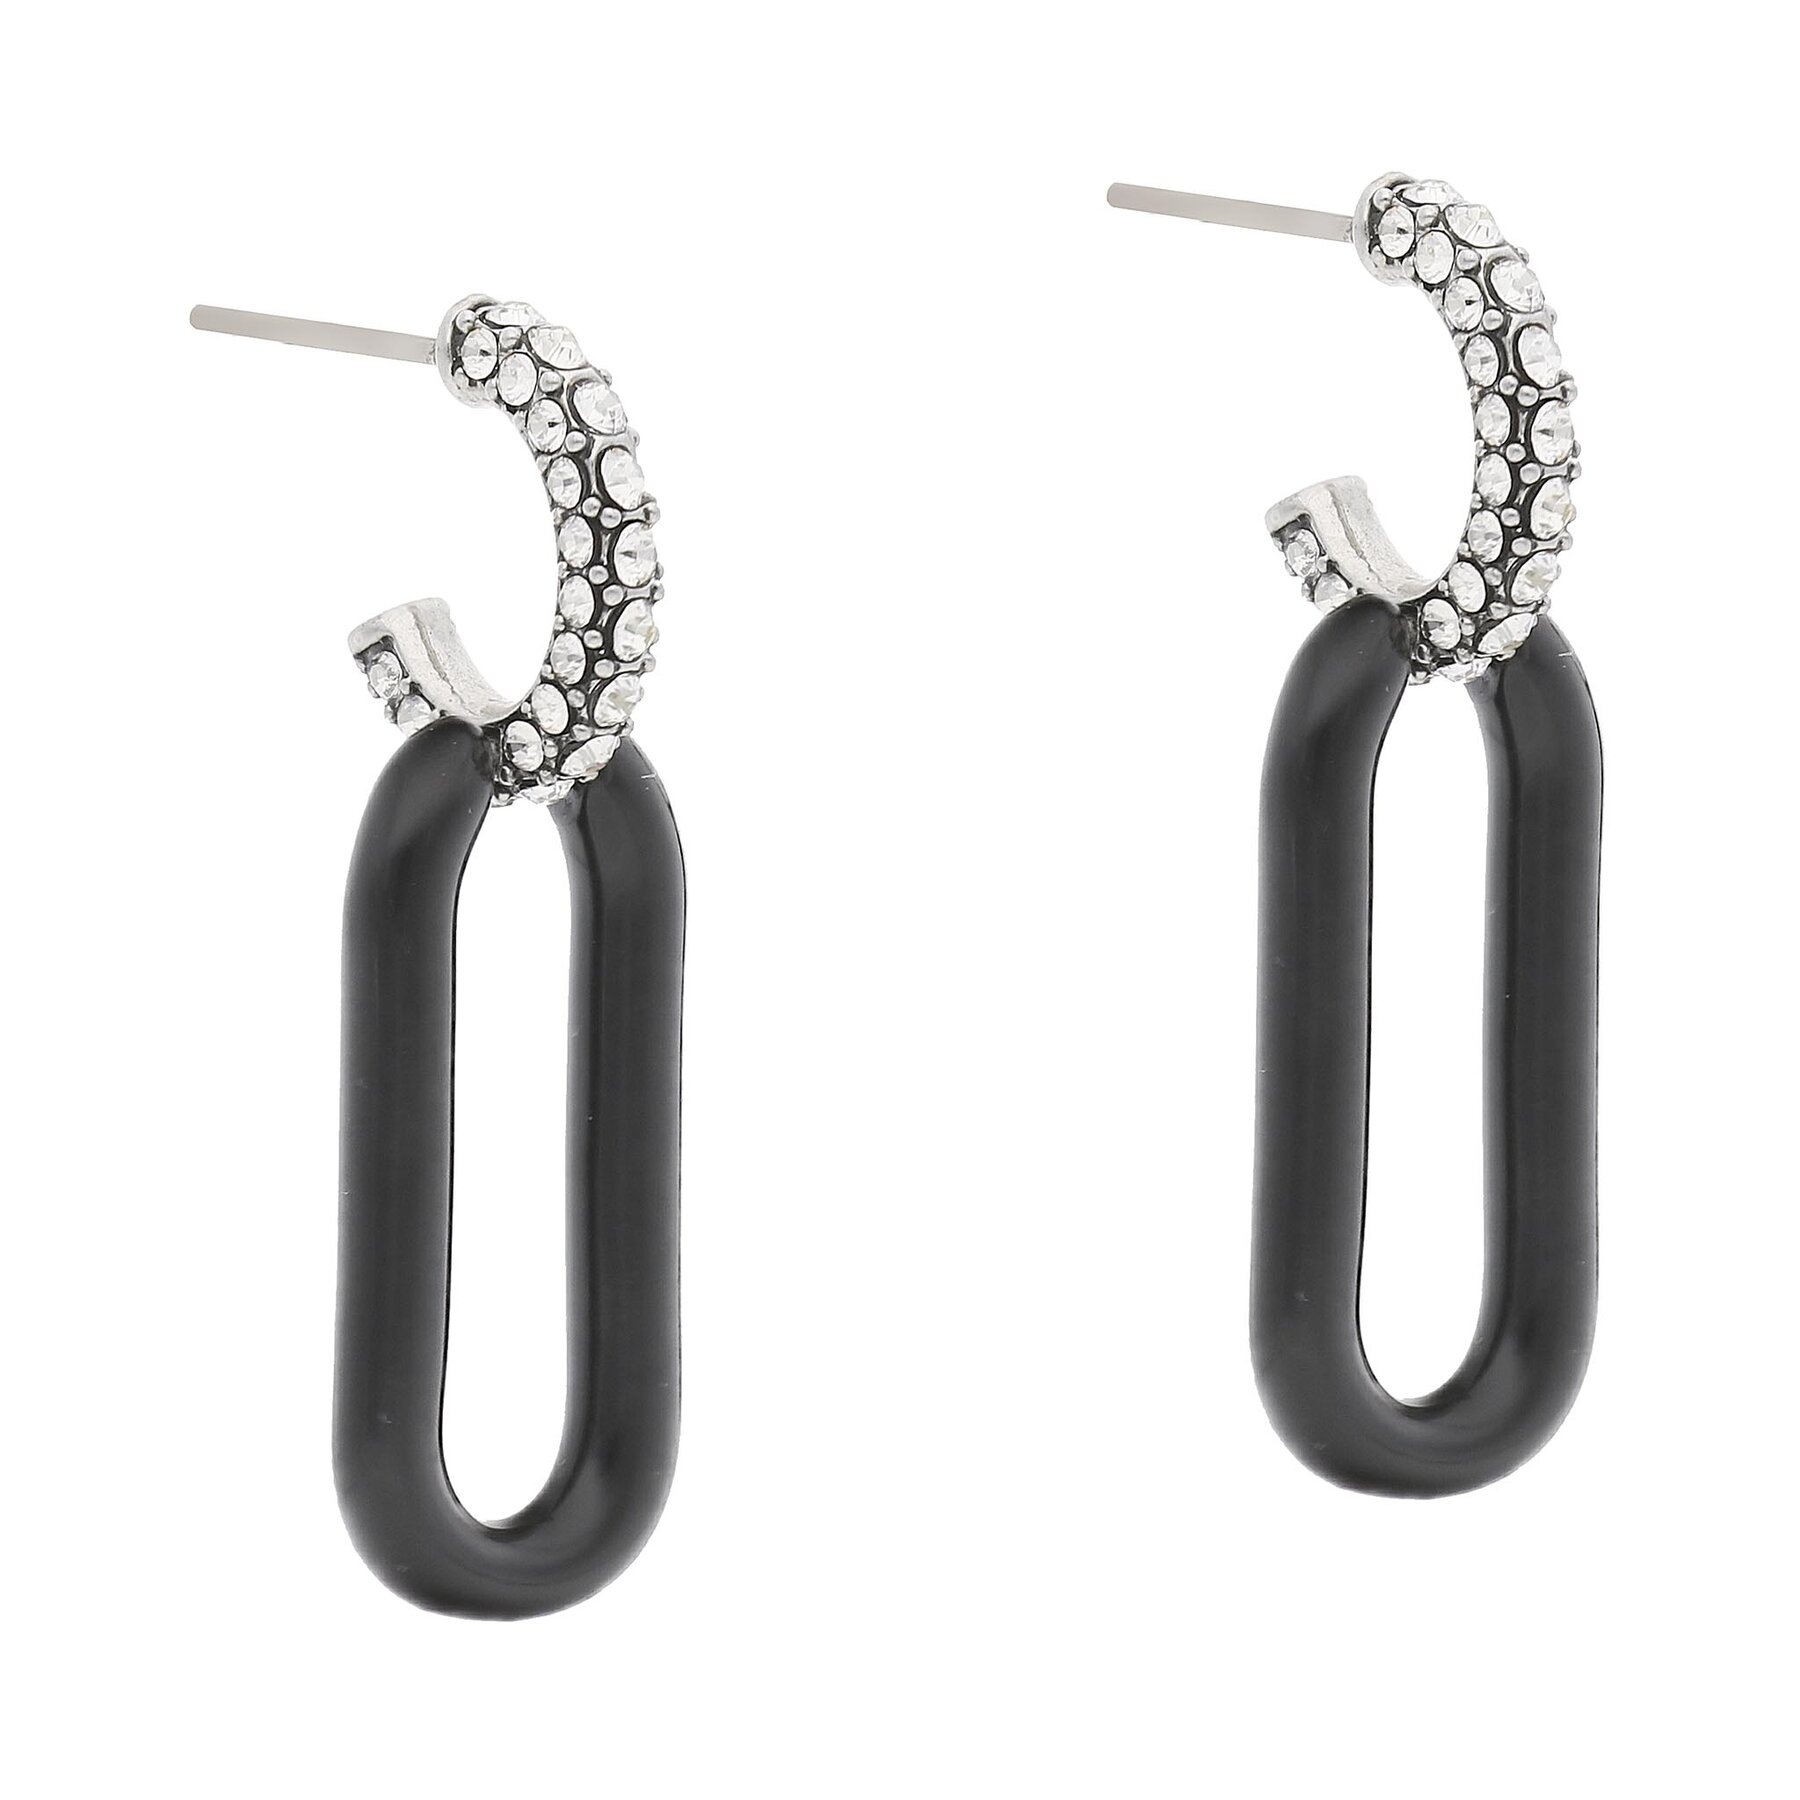 Uhani Tory Burch Roxanne Link Earring Antique 141789 Pweter/Black/Cryst 001